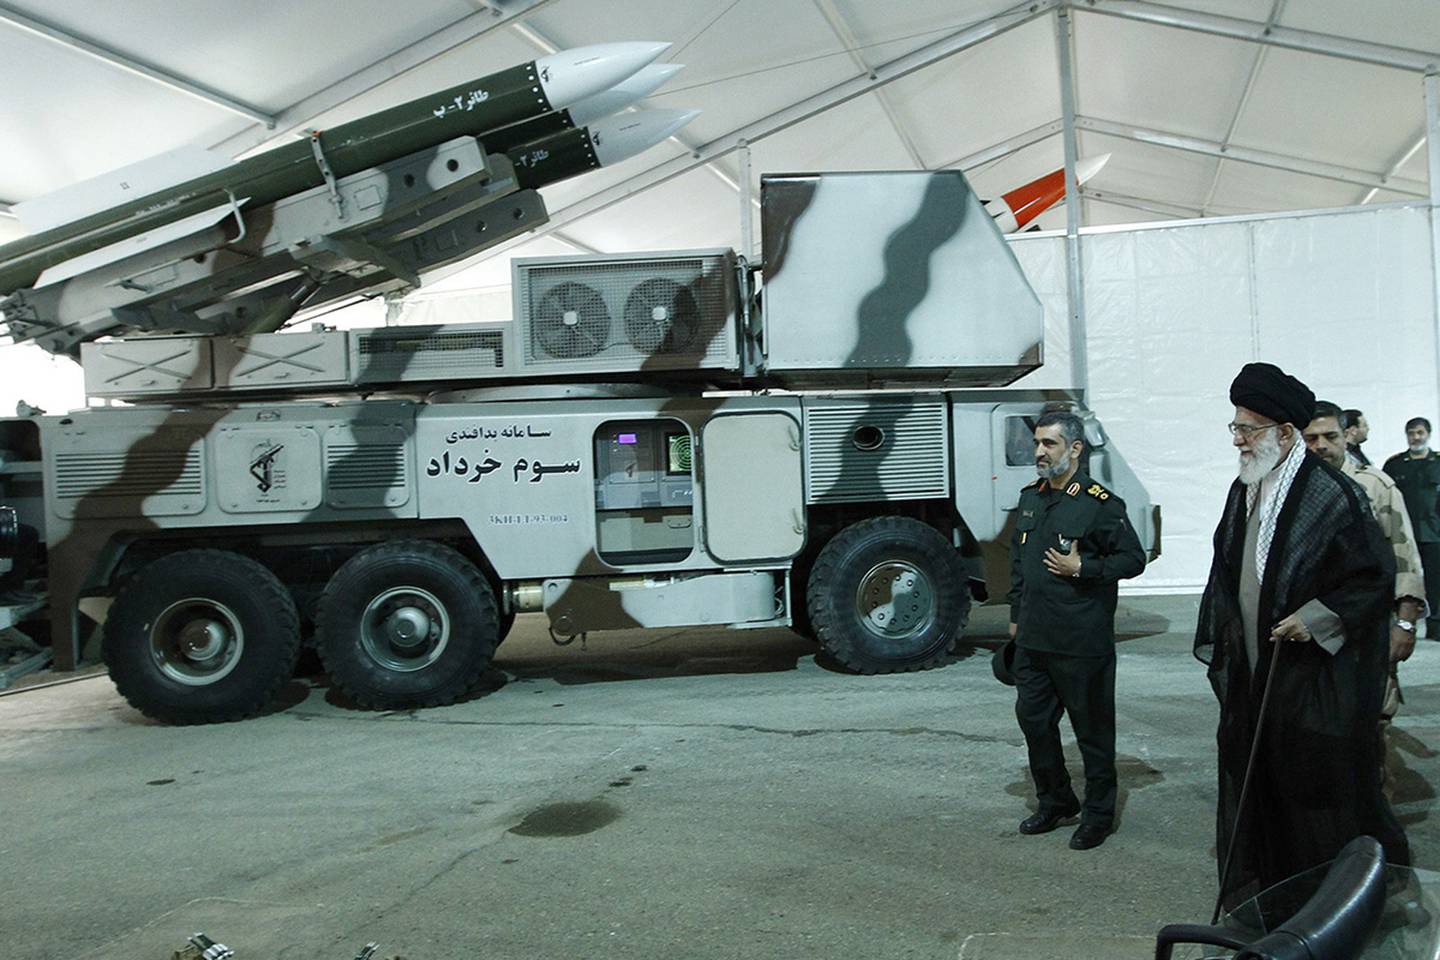 Iran said it has used its air defense system known as Third of Khordad, seen here on May 11, 2014, to shoot down the drone — a truck-based missile system that can fire up to 18 miles (30 kilometers) into the sky.